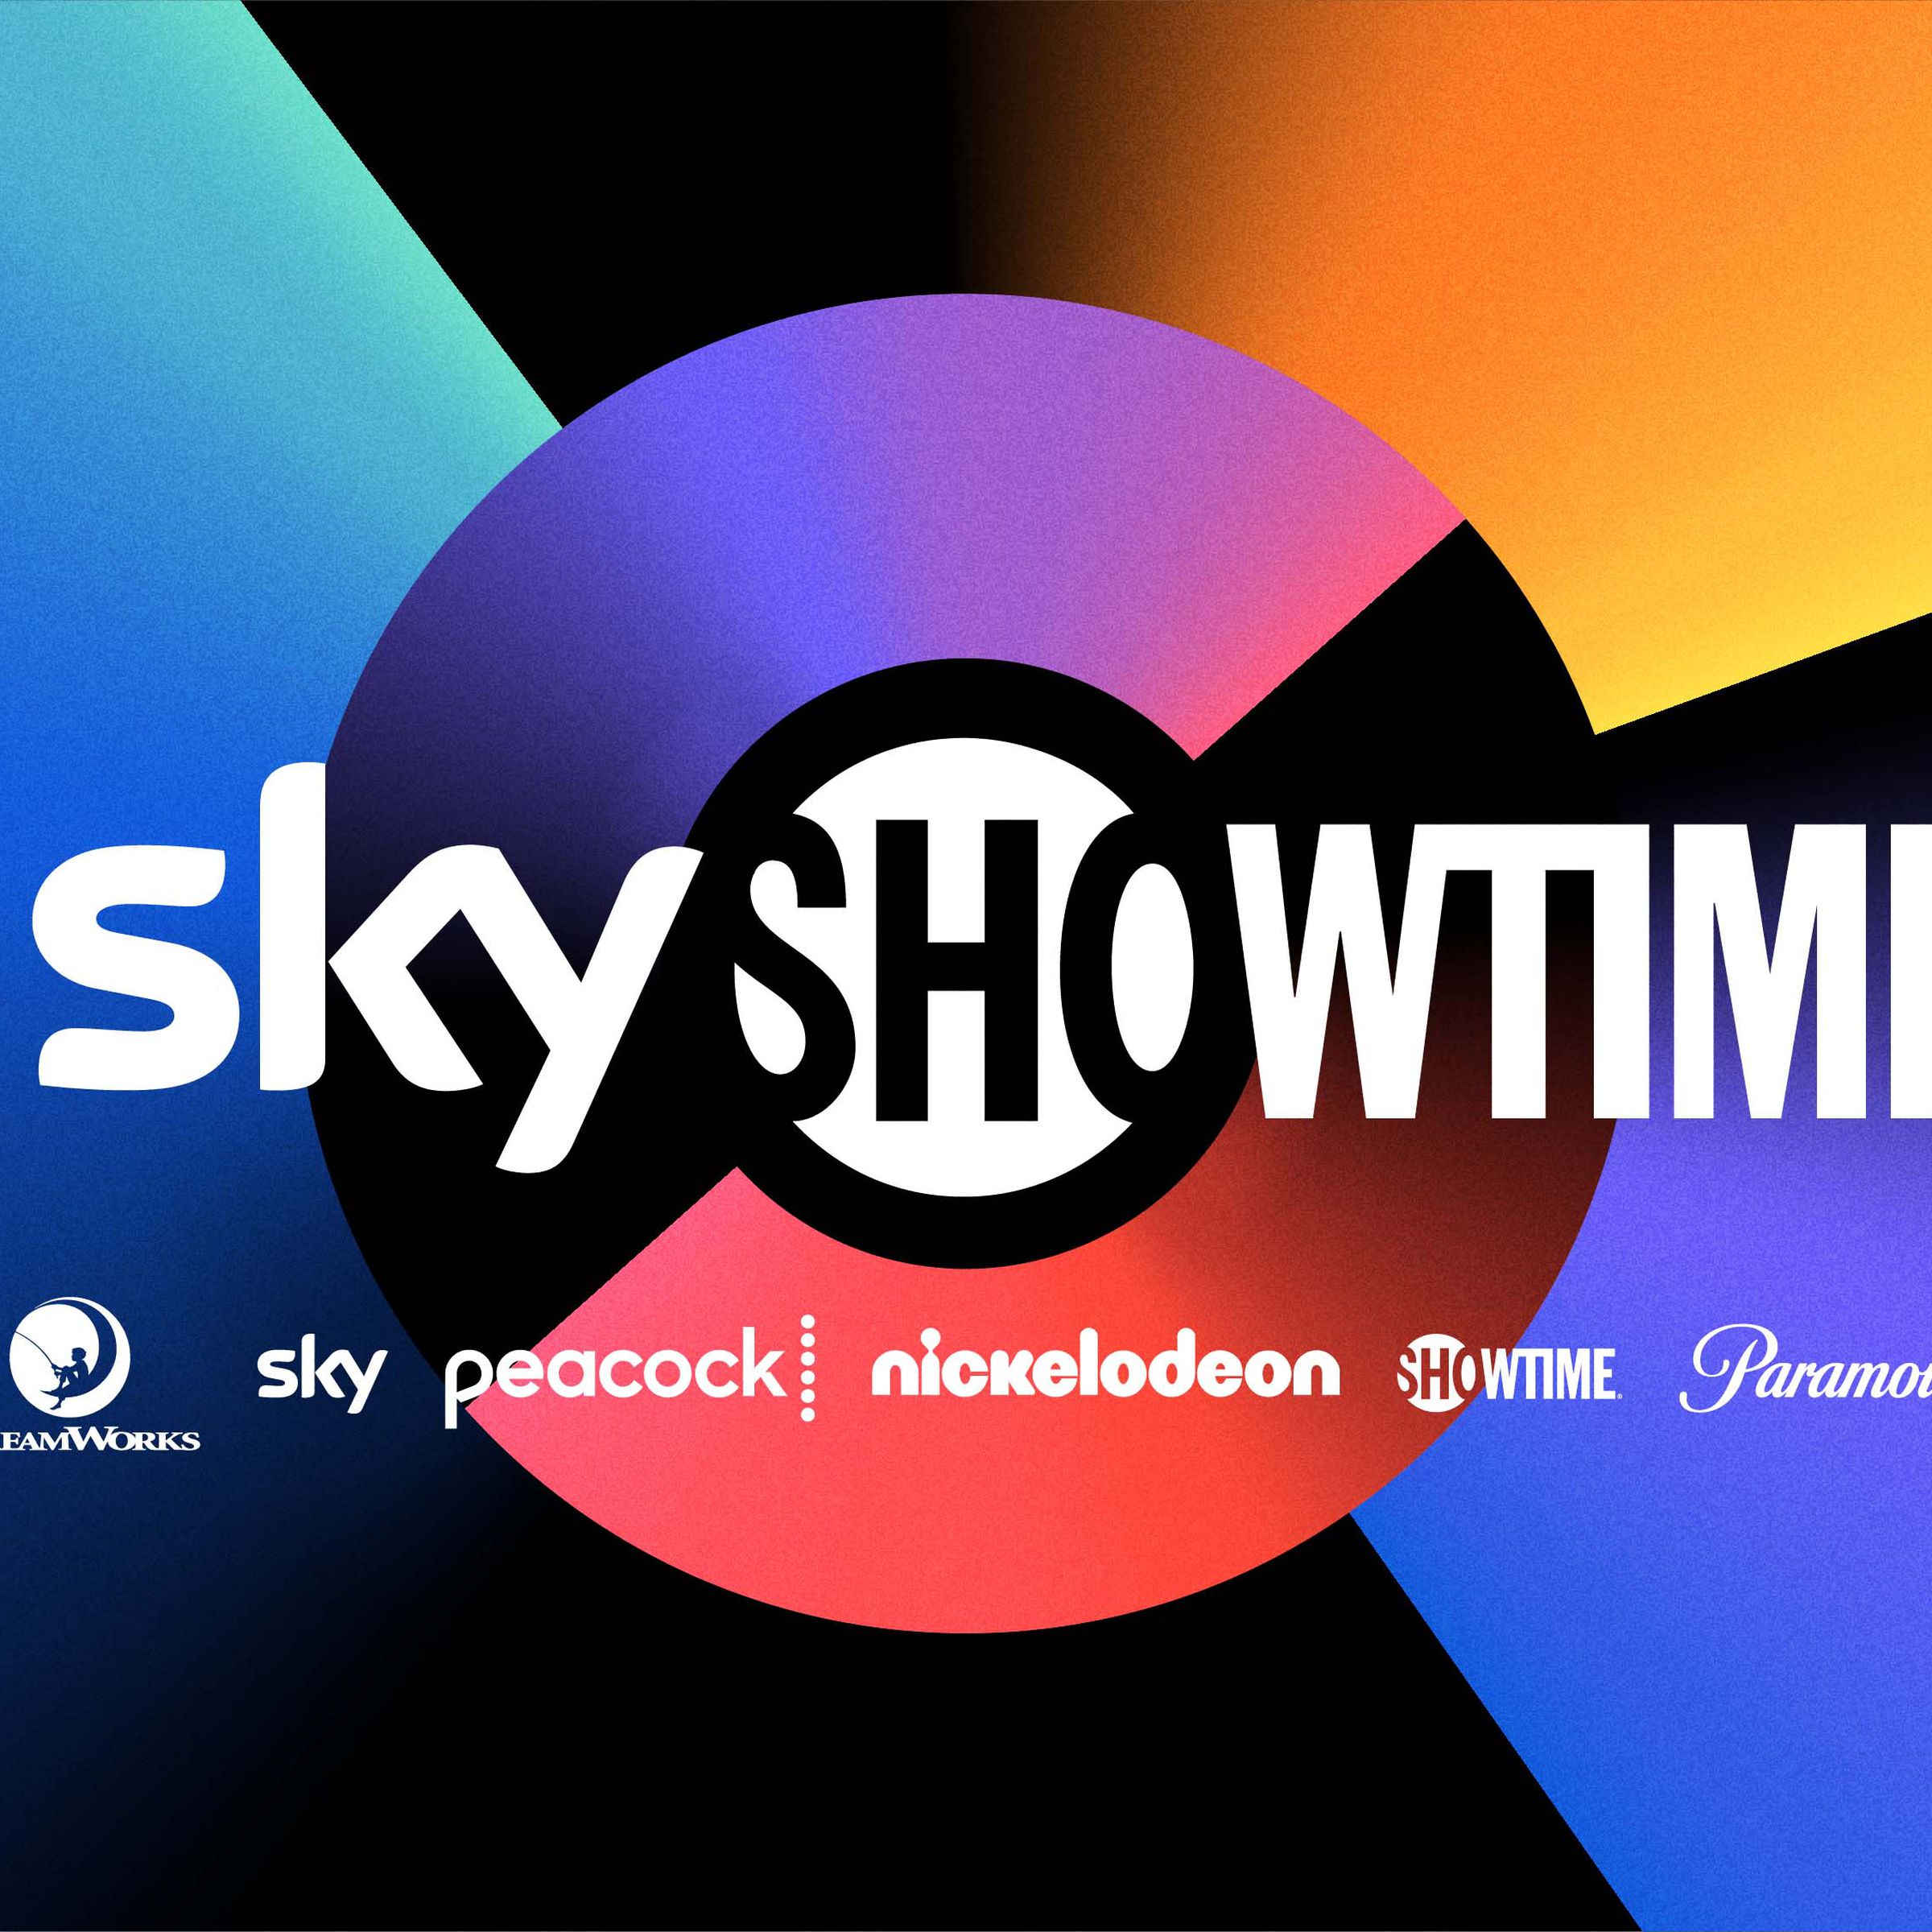 The SkyShowtime logo and logos for its content partners.